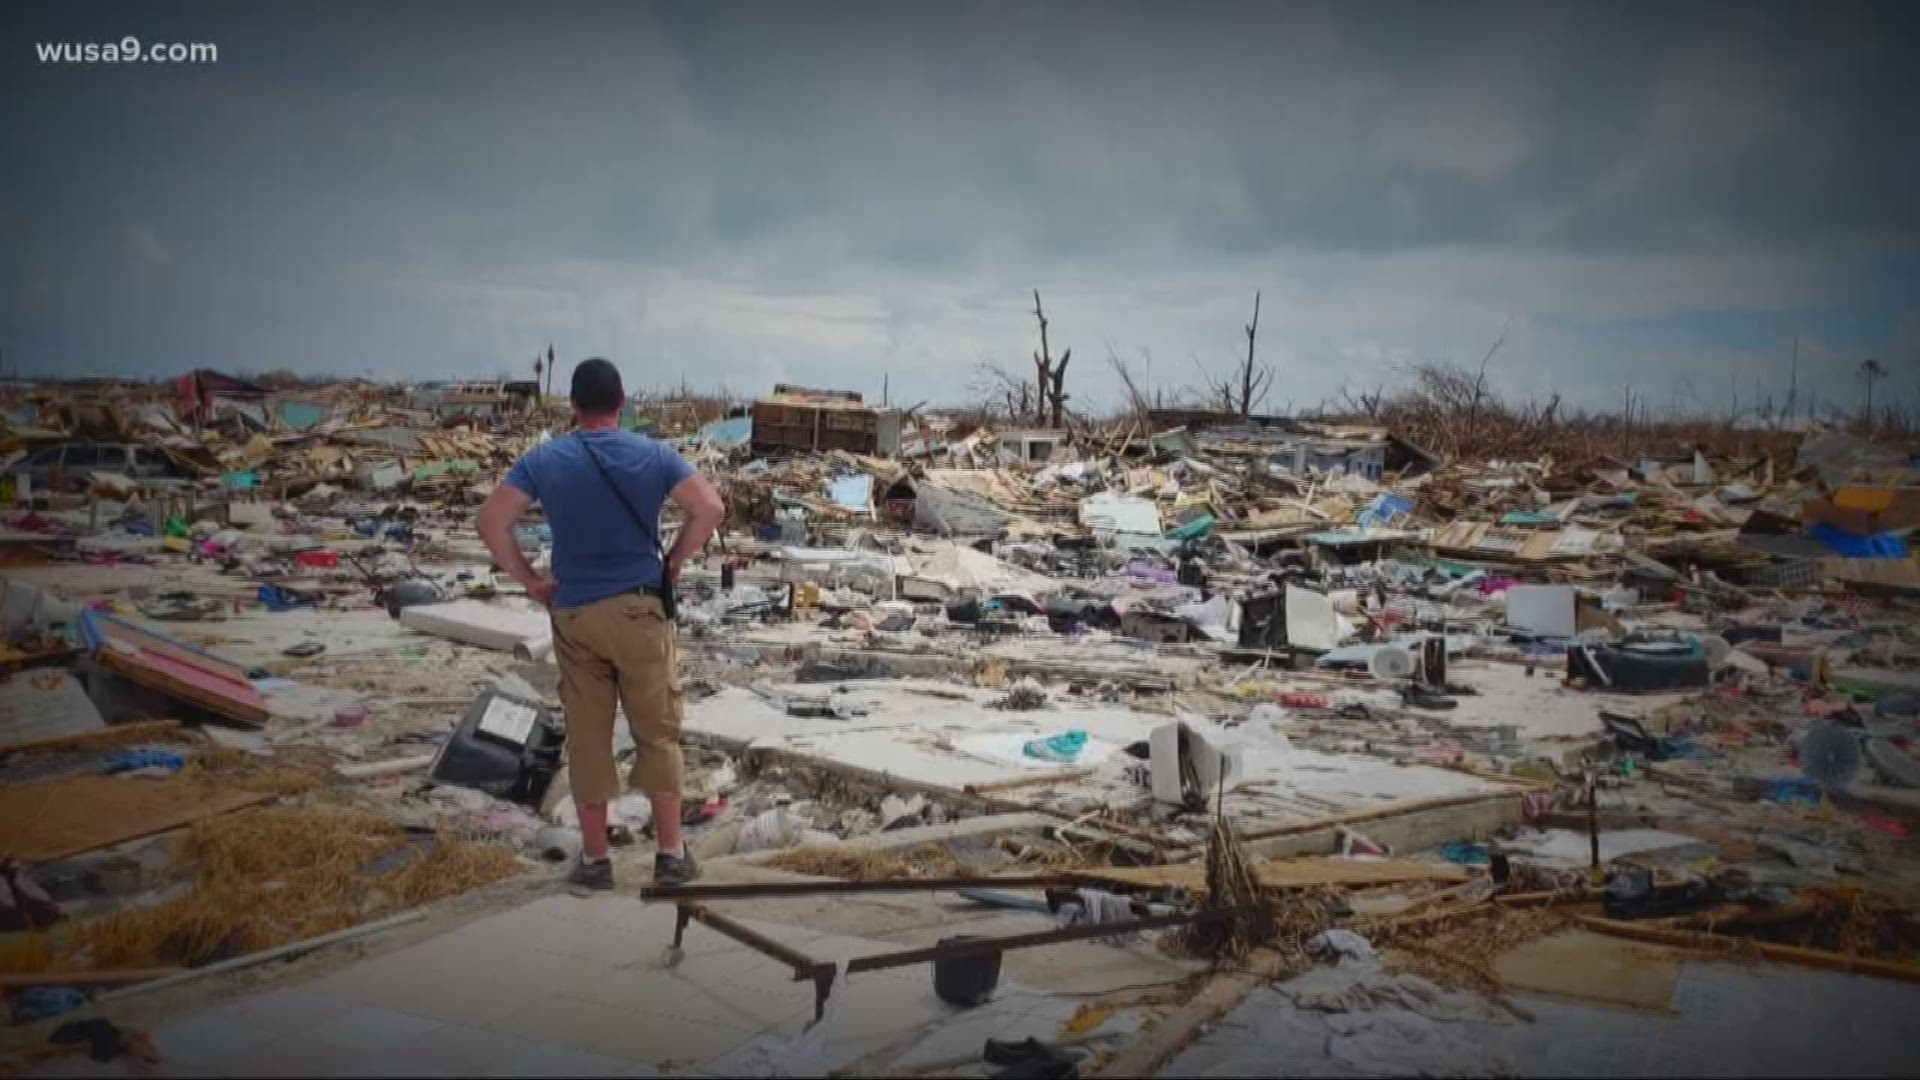 With more than 1,000 people still missing in the  Bahamas after Hurricane Dorian, Michael Brewer plans to go back to help.